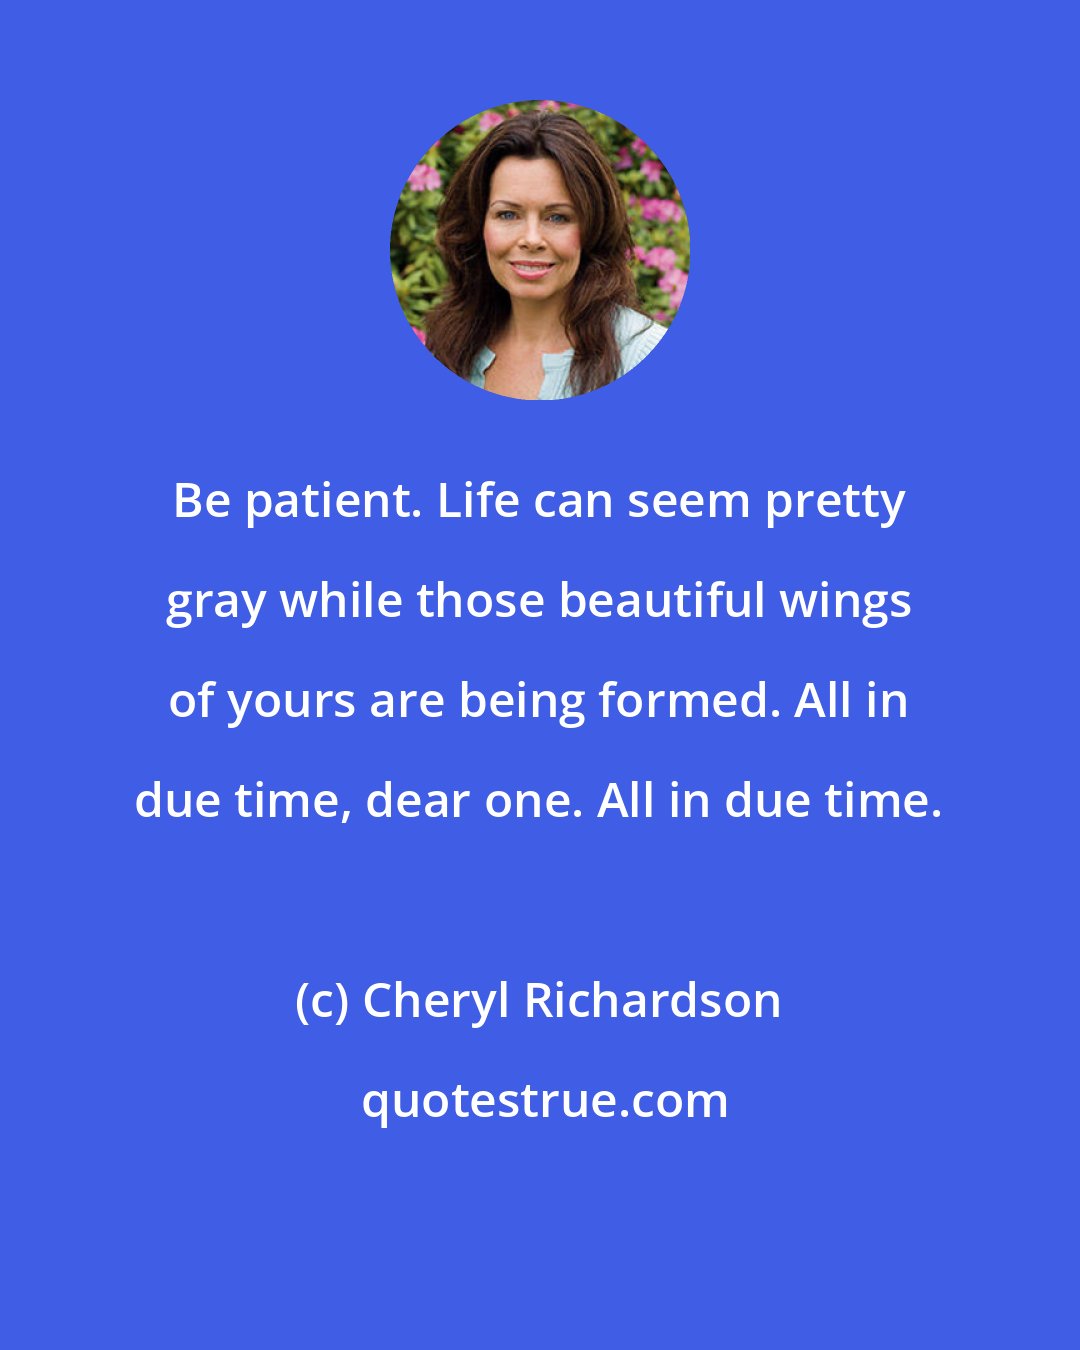 Cheryl Richardson: Be patient. Life can seem pretty gray while those beautiful wings of yours are being formed. All in due time, dear one. All in due time.